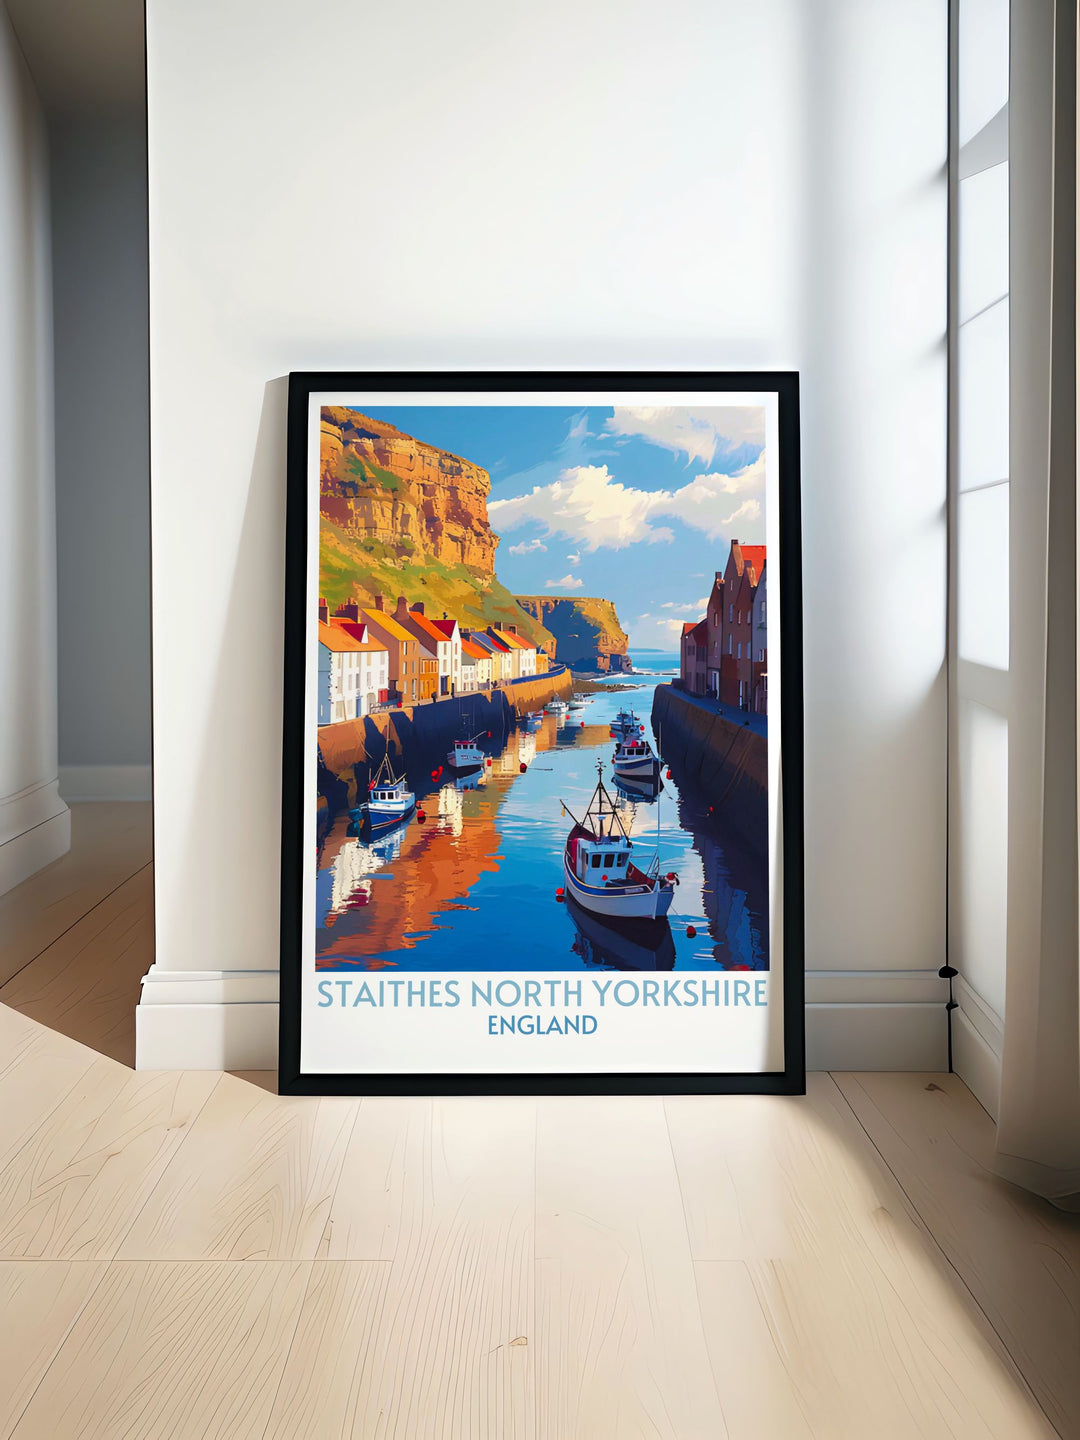 A picturesque view of Staithes Harbour with colorful fishing boats bobbing in the calm waters and charming cottages lining the rugged cliffs. The tranquil scene is perfect for adding coastal charm to any space.